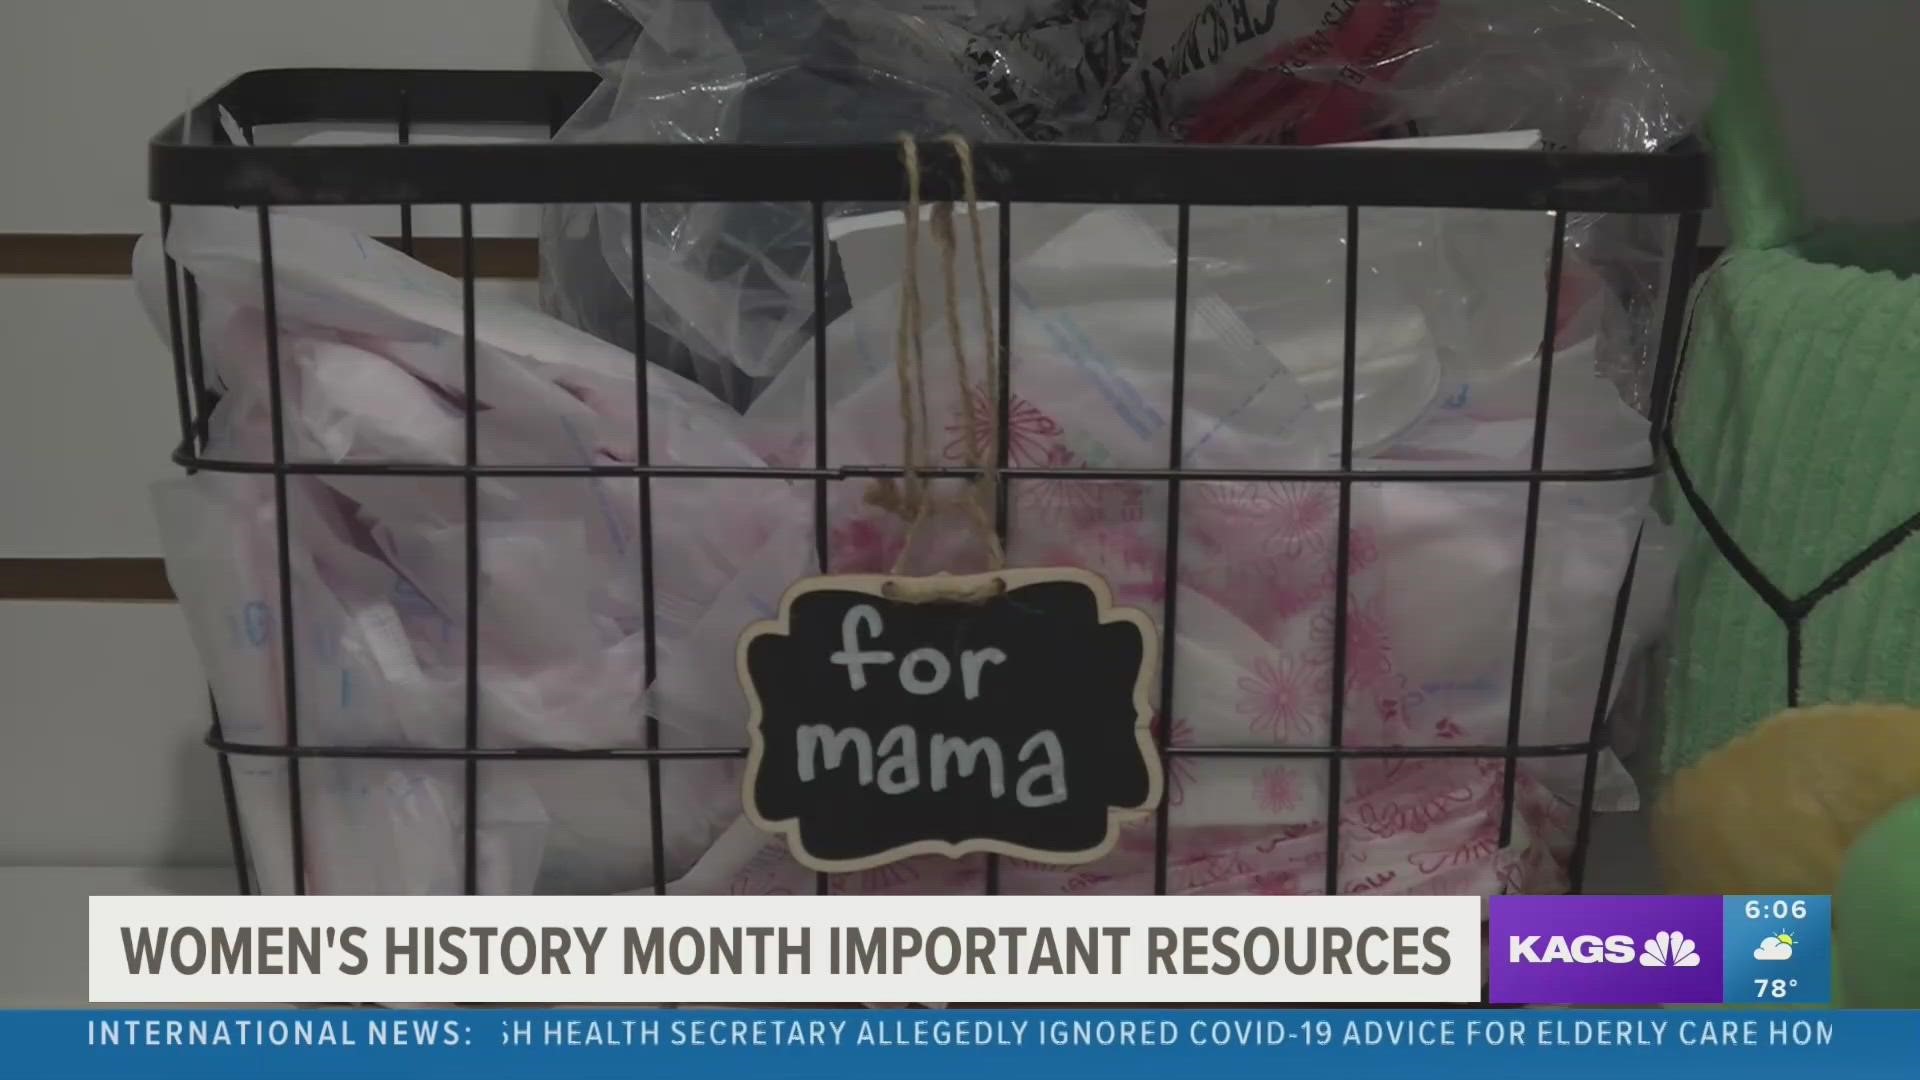 March marks the start of Women's History Month, and local organizations want to remind women about the resources that are available to them year-round.